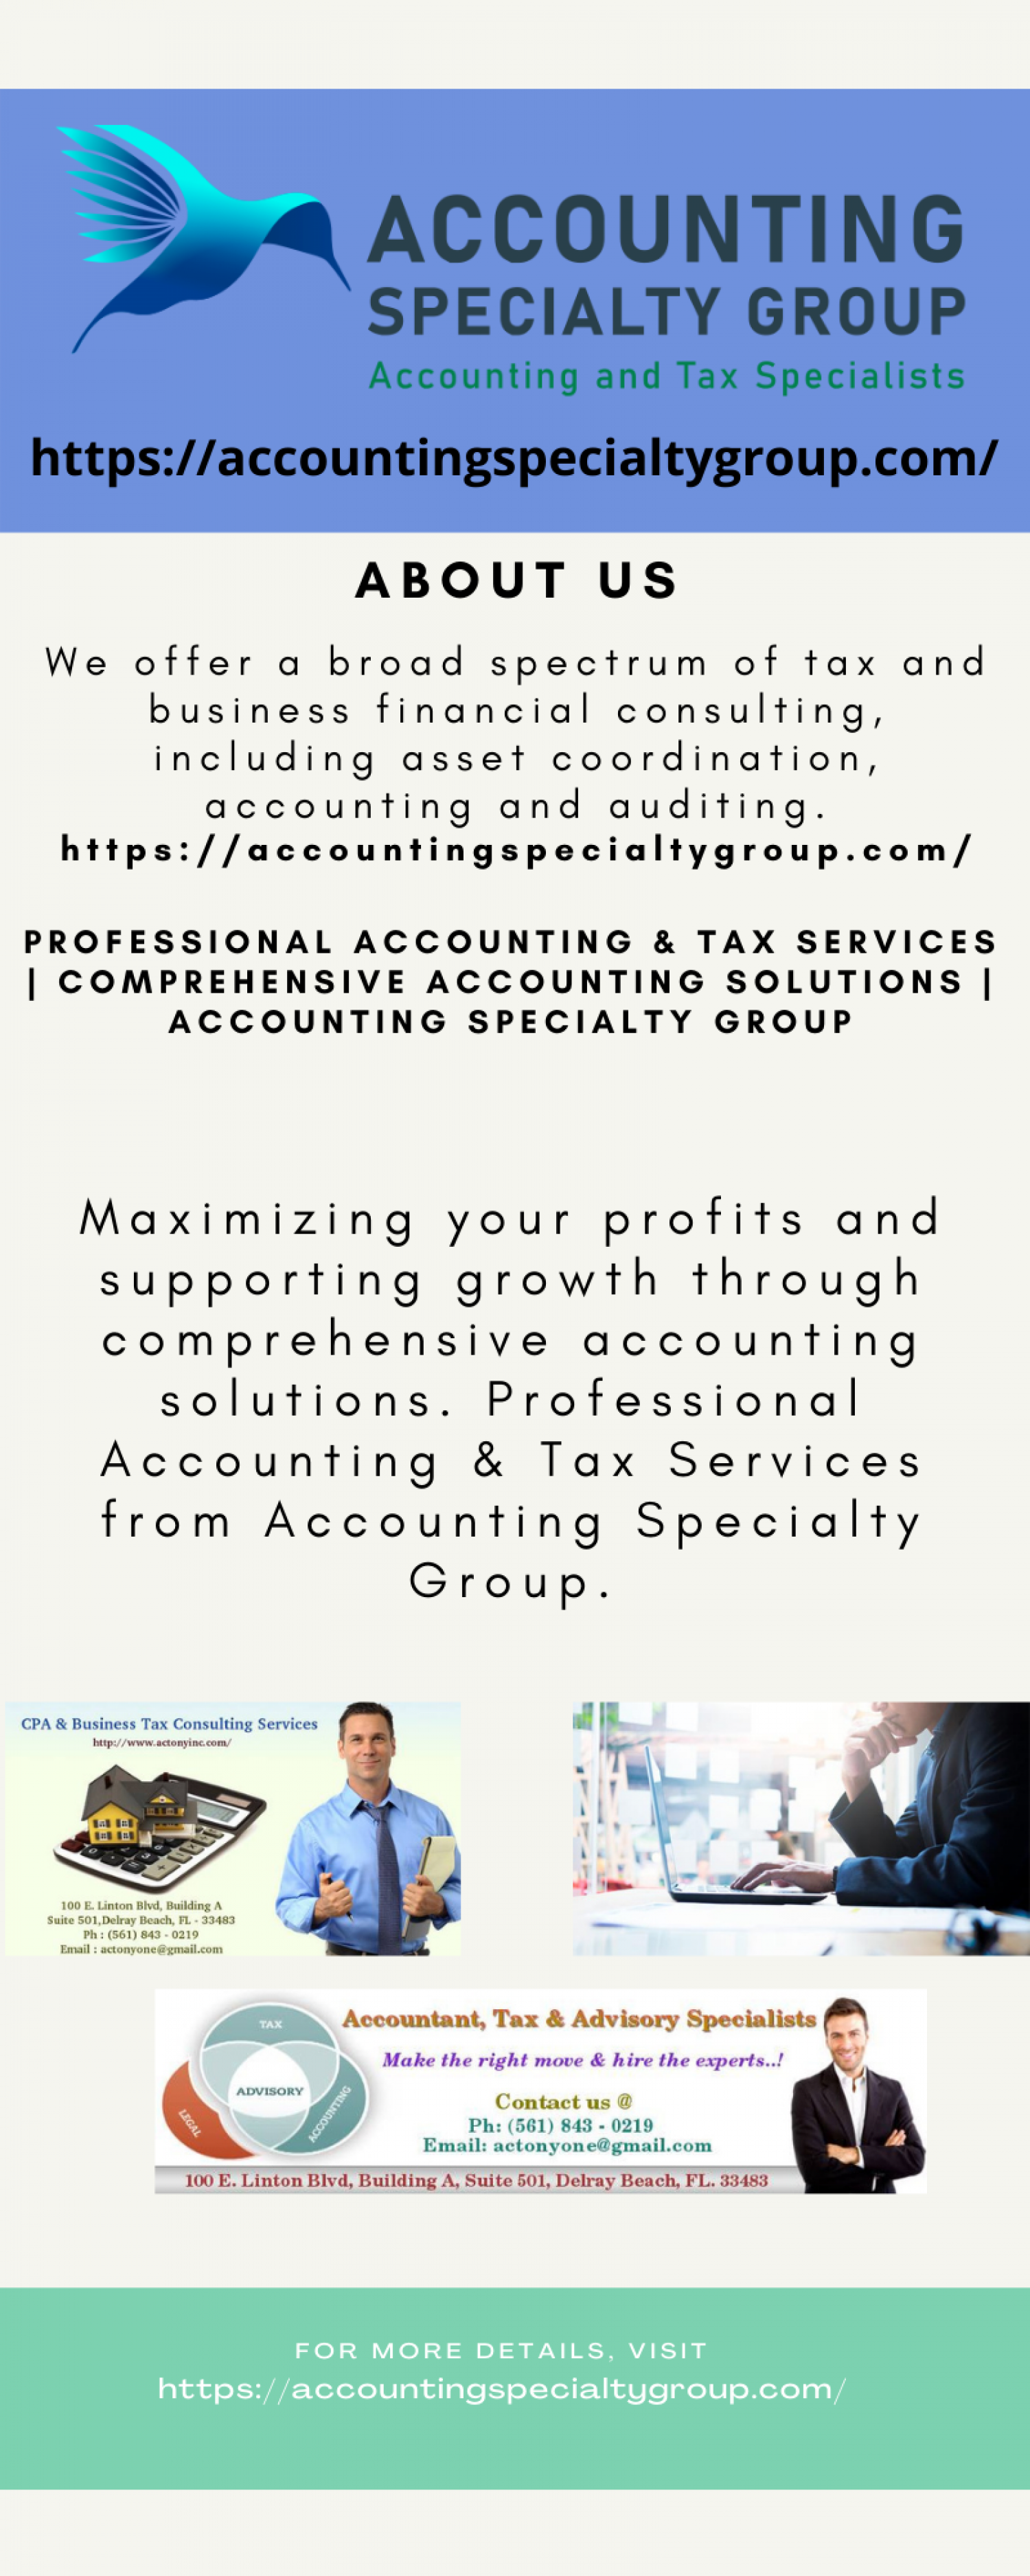 Professional Accounting & Tax Services | Comprehensive Accounting Solutions | Accounting Specialty Group Infographic